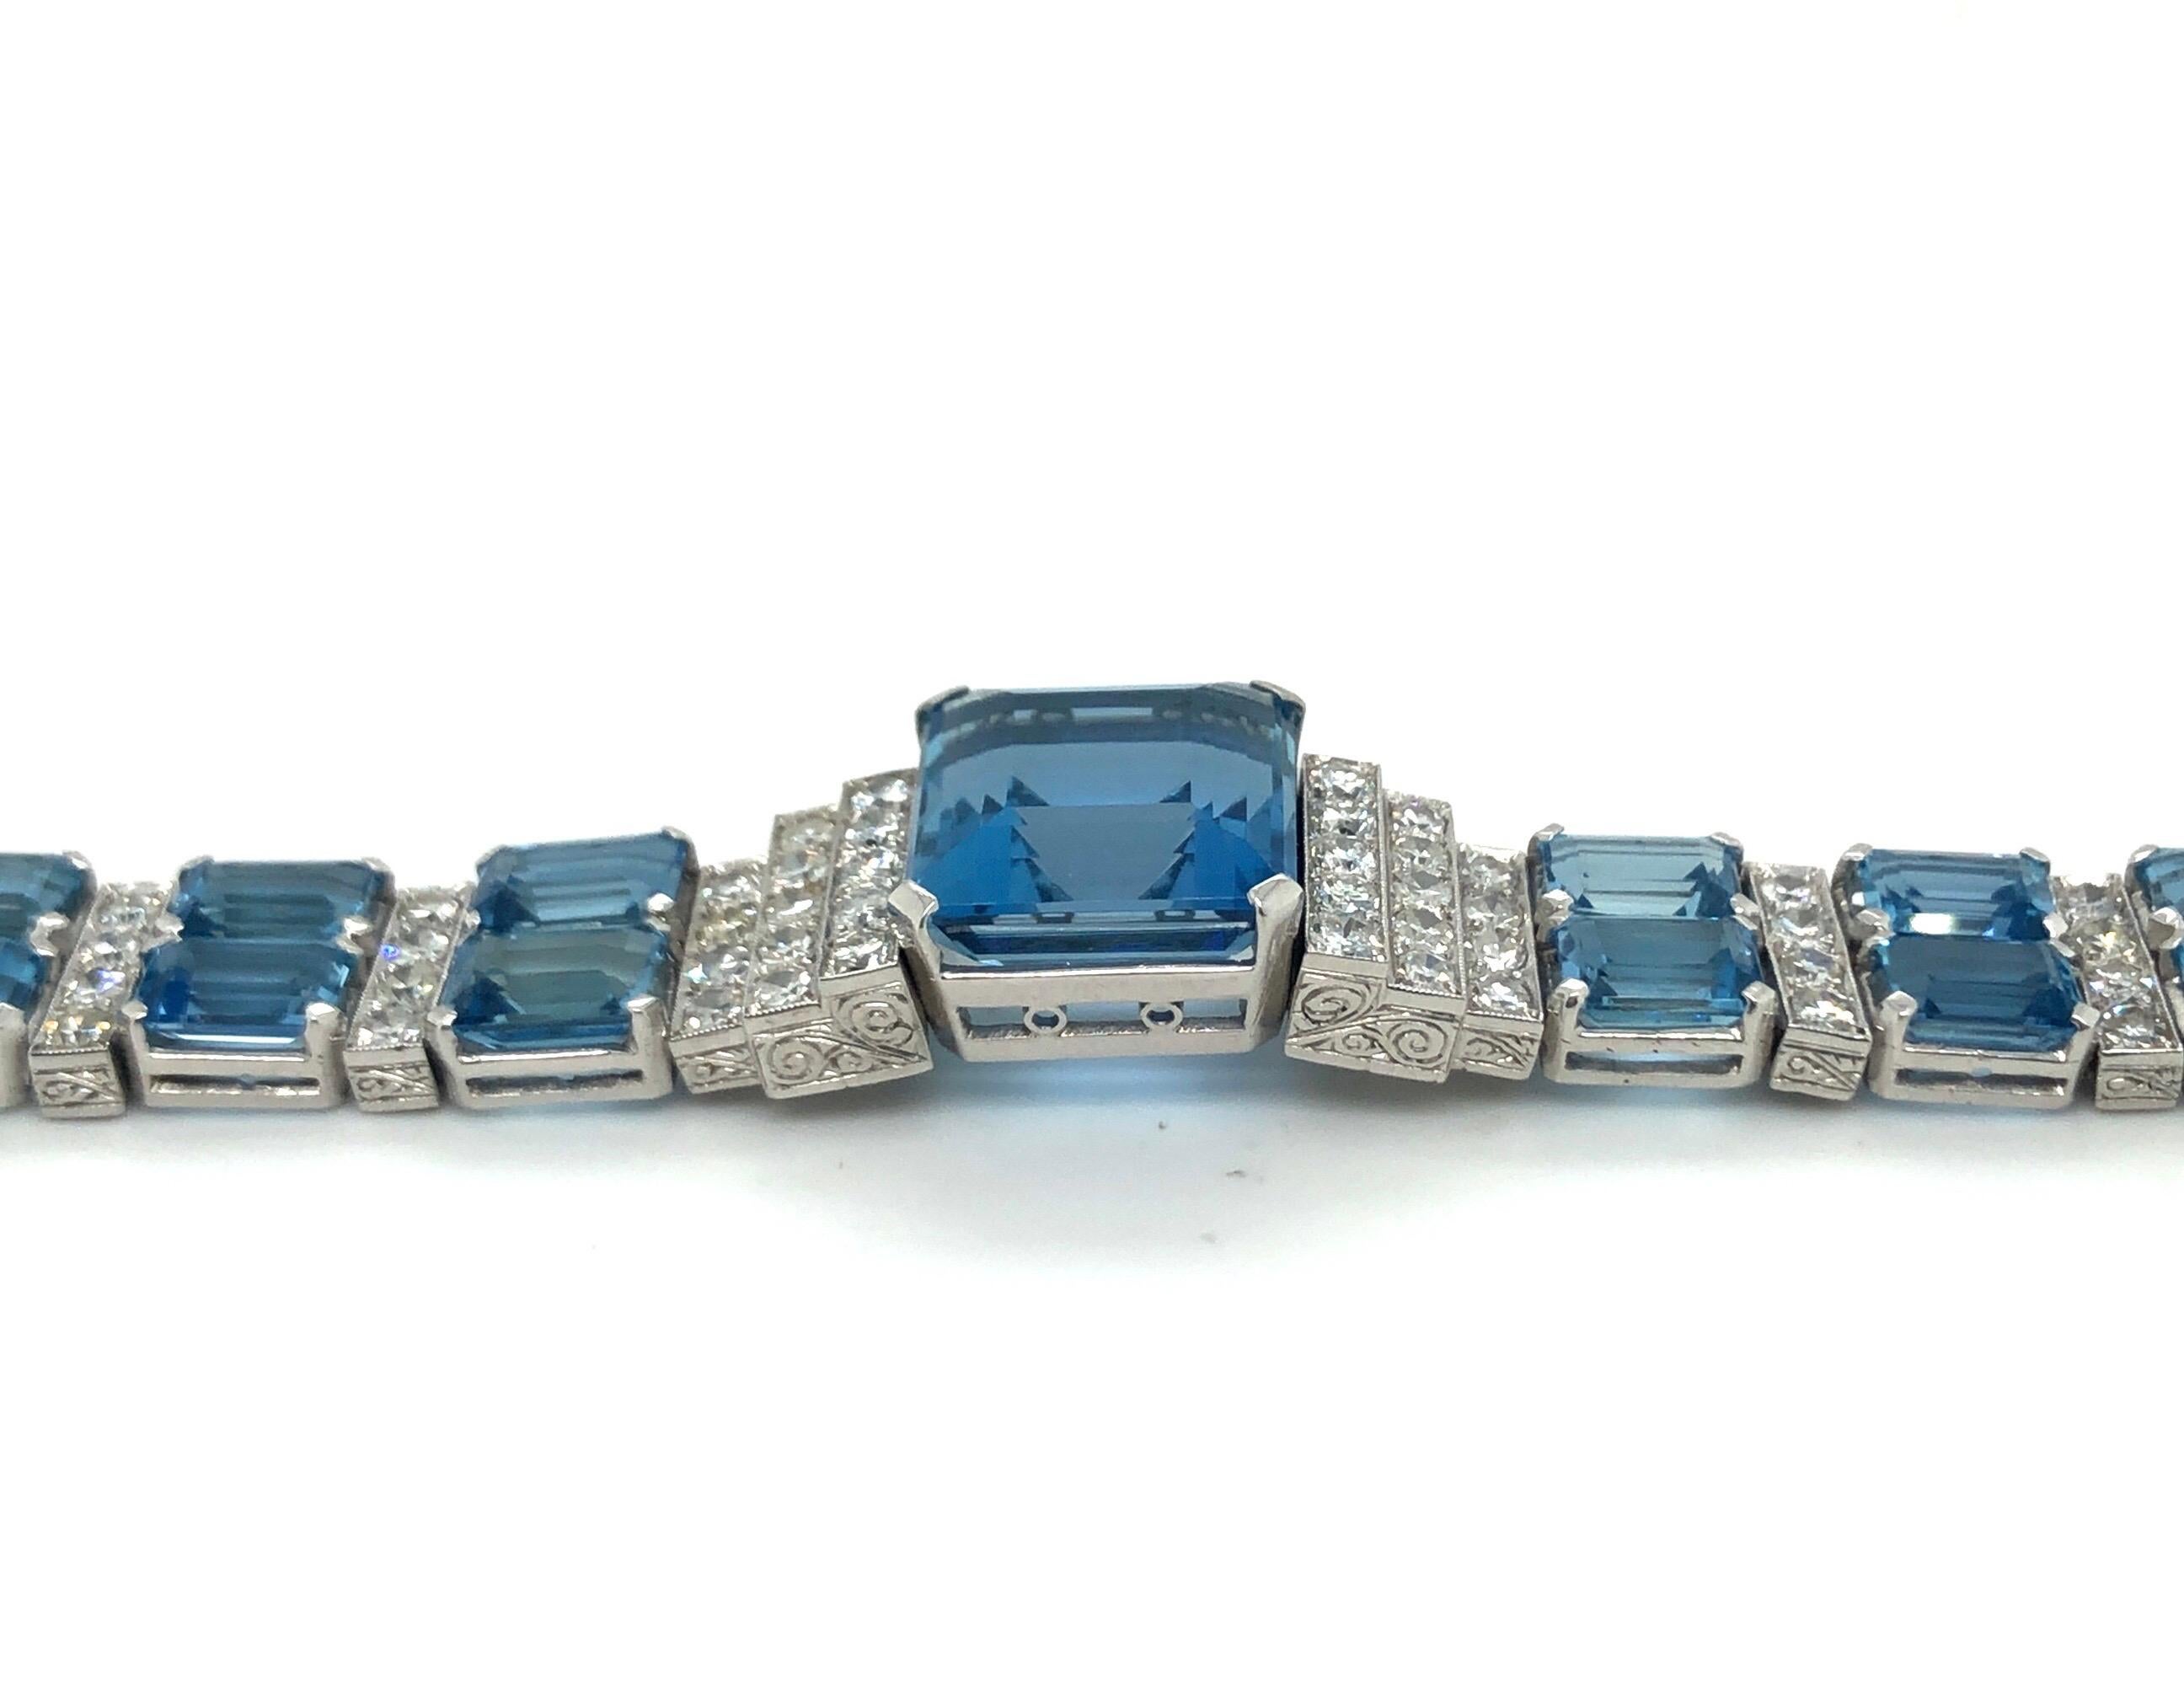 Absolutely stunning Aquamarine Diamond Platinum Art Deco Bracelet from the 1920s.
Entirely handcrafted in platinum and set with 29 octagonal aquamarines of impeccable quality totalling circa 45 carats and 82 old-cut and single-cut diamonds totalling